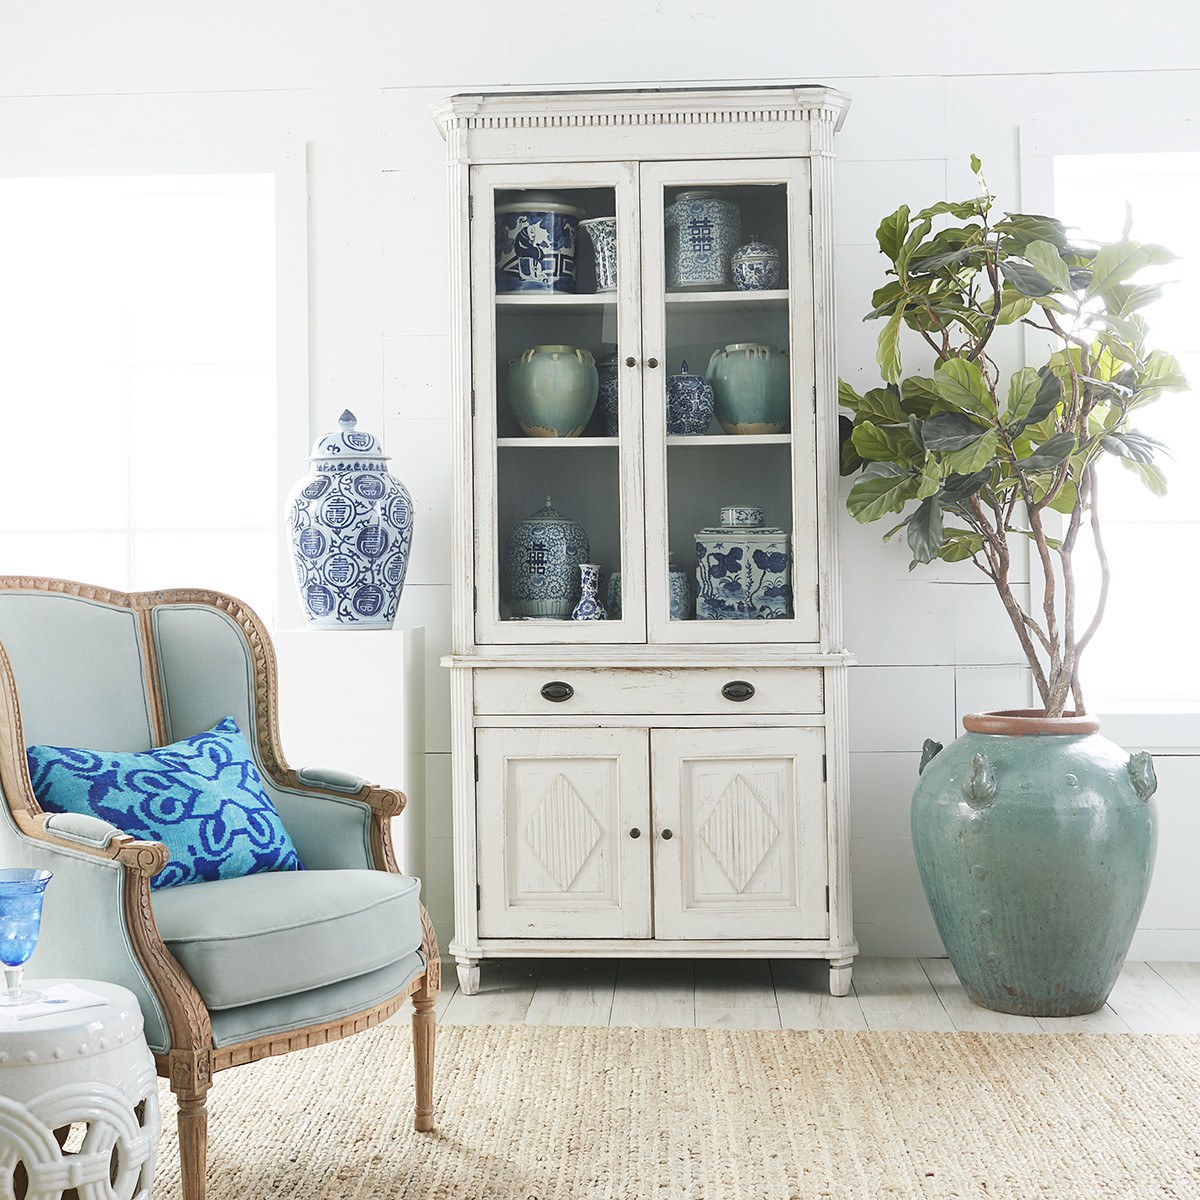 Wisteria Gustavian cabinet - painted wood furniture